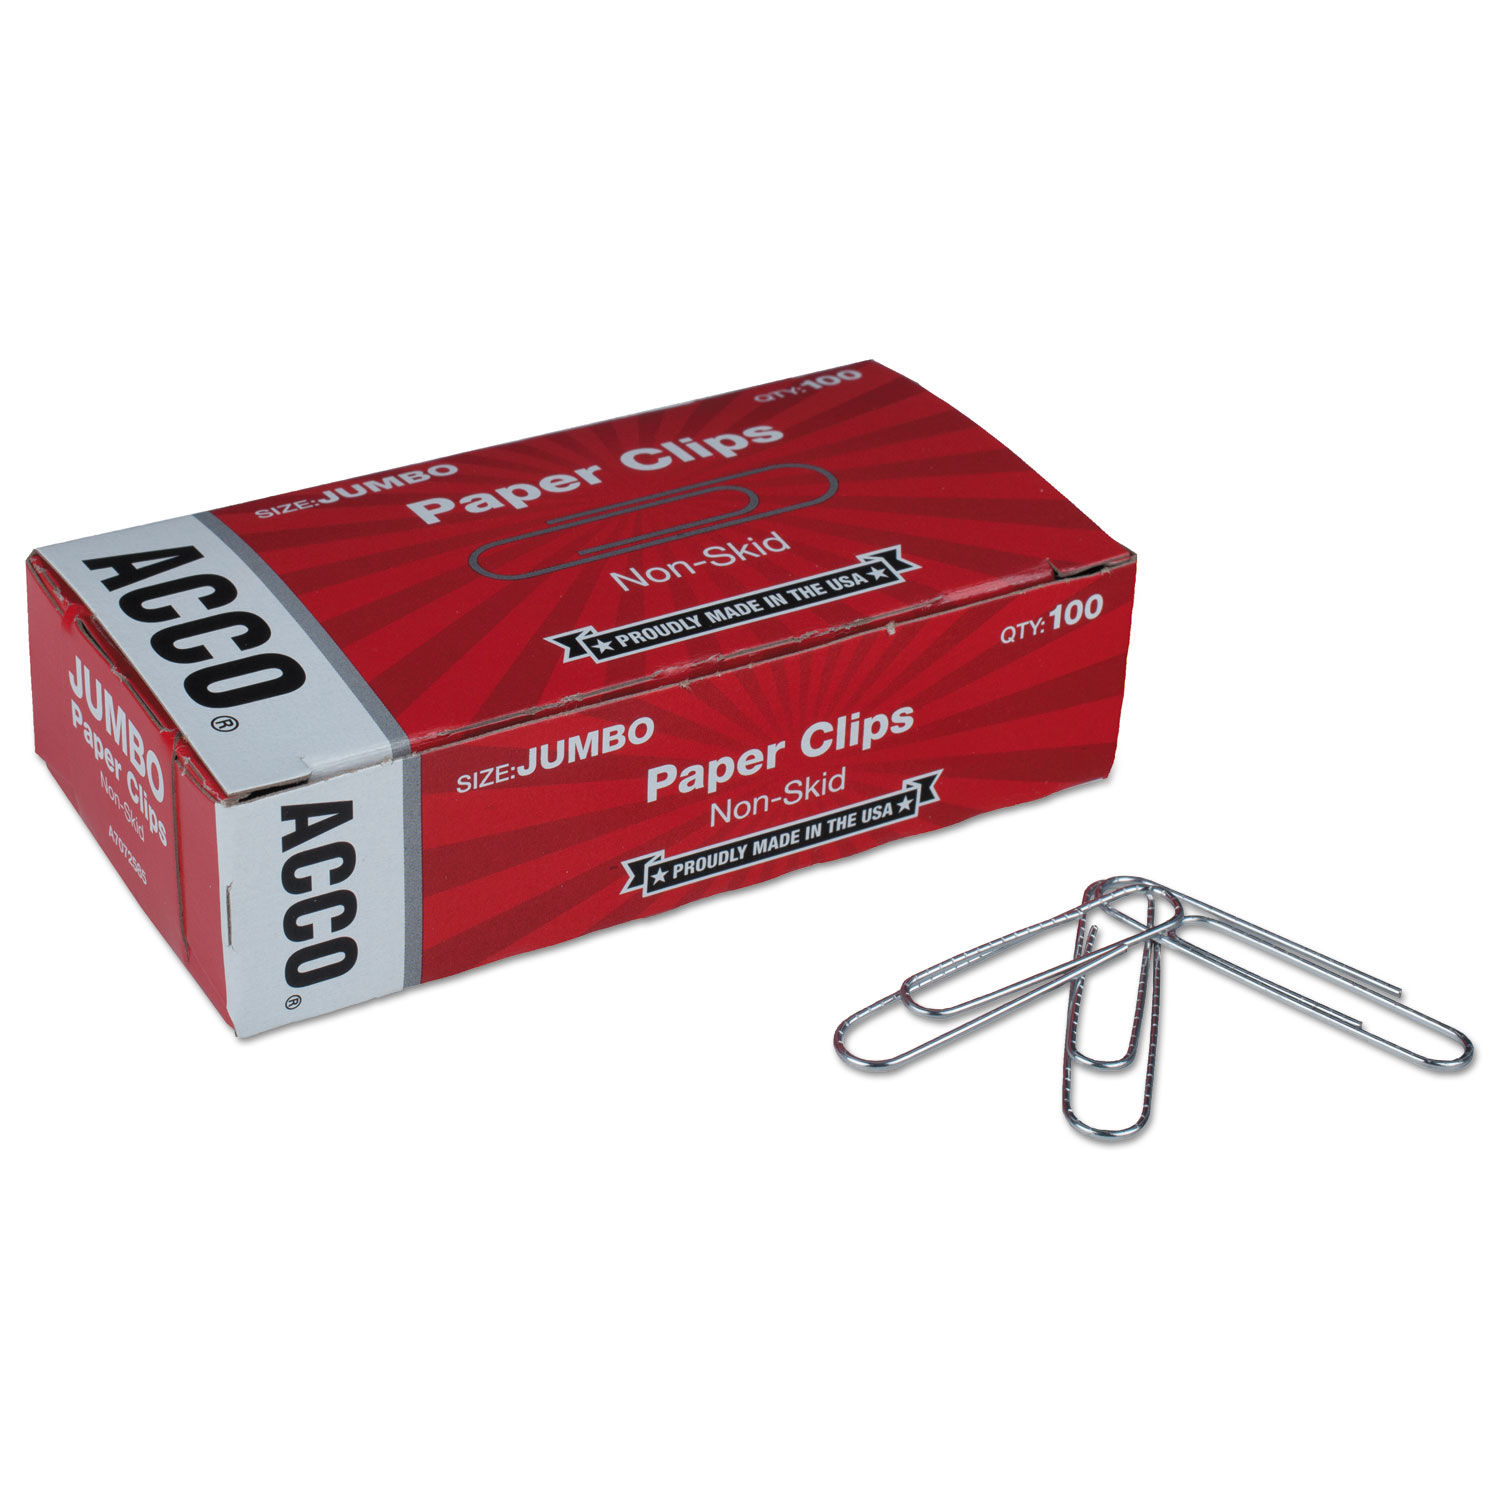 Paper Clips by ACCO ACC72585